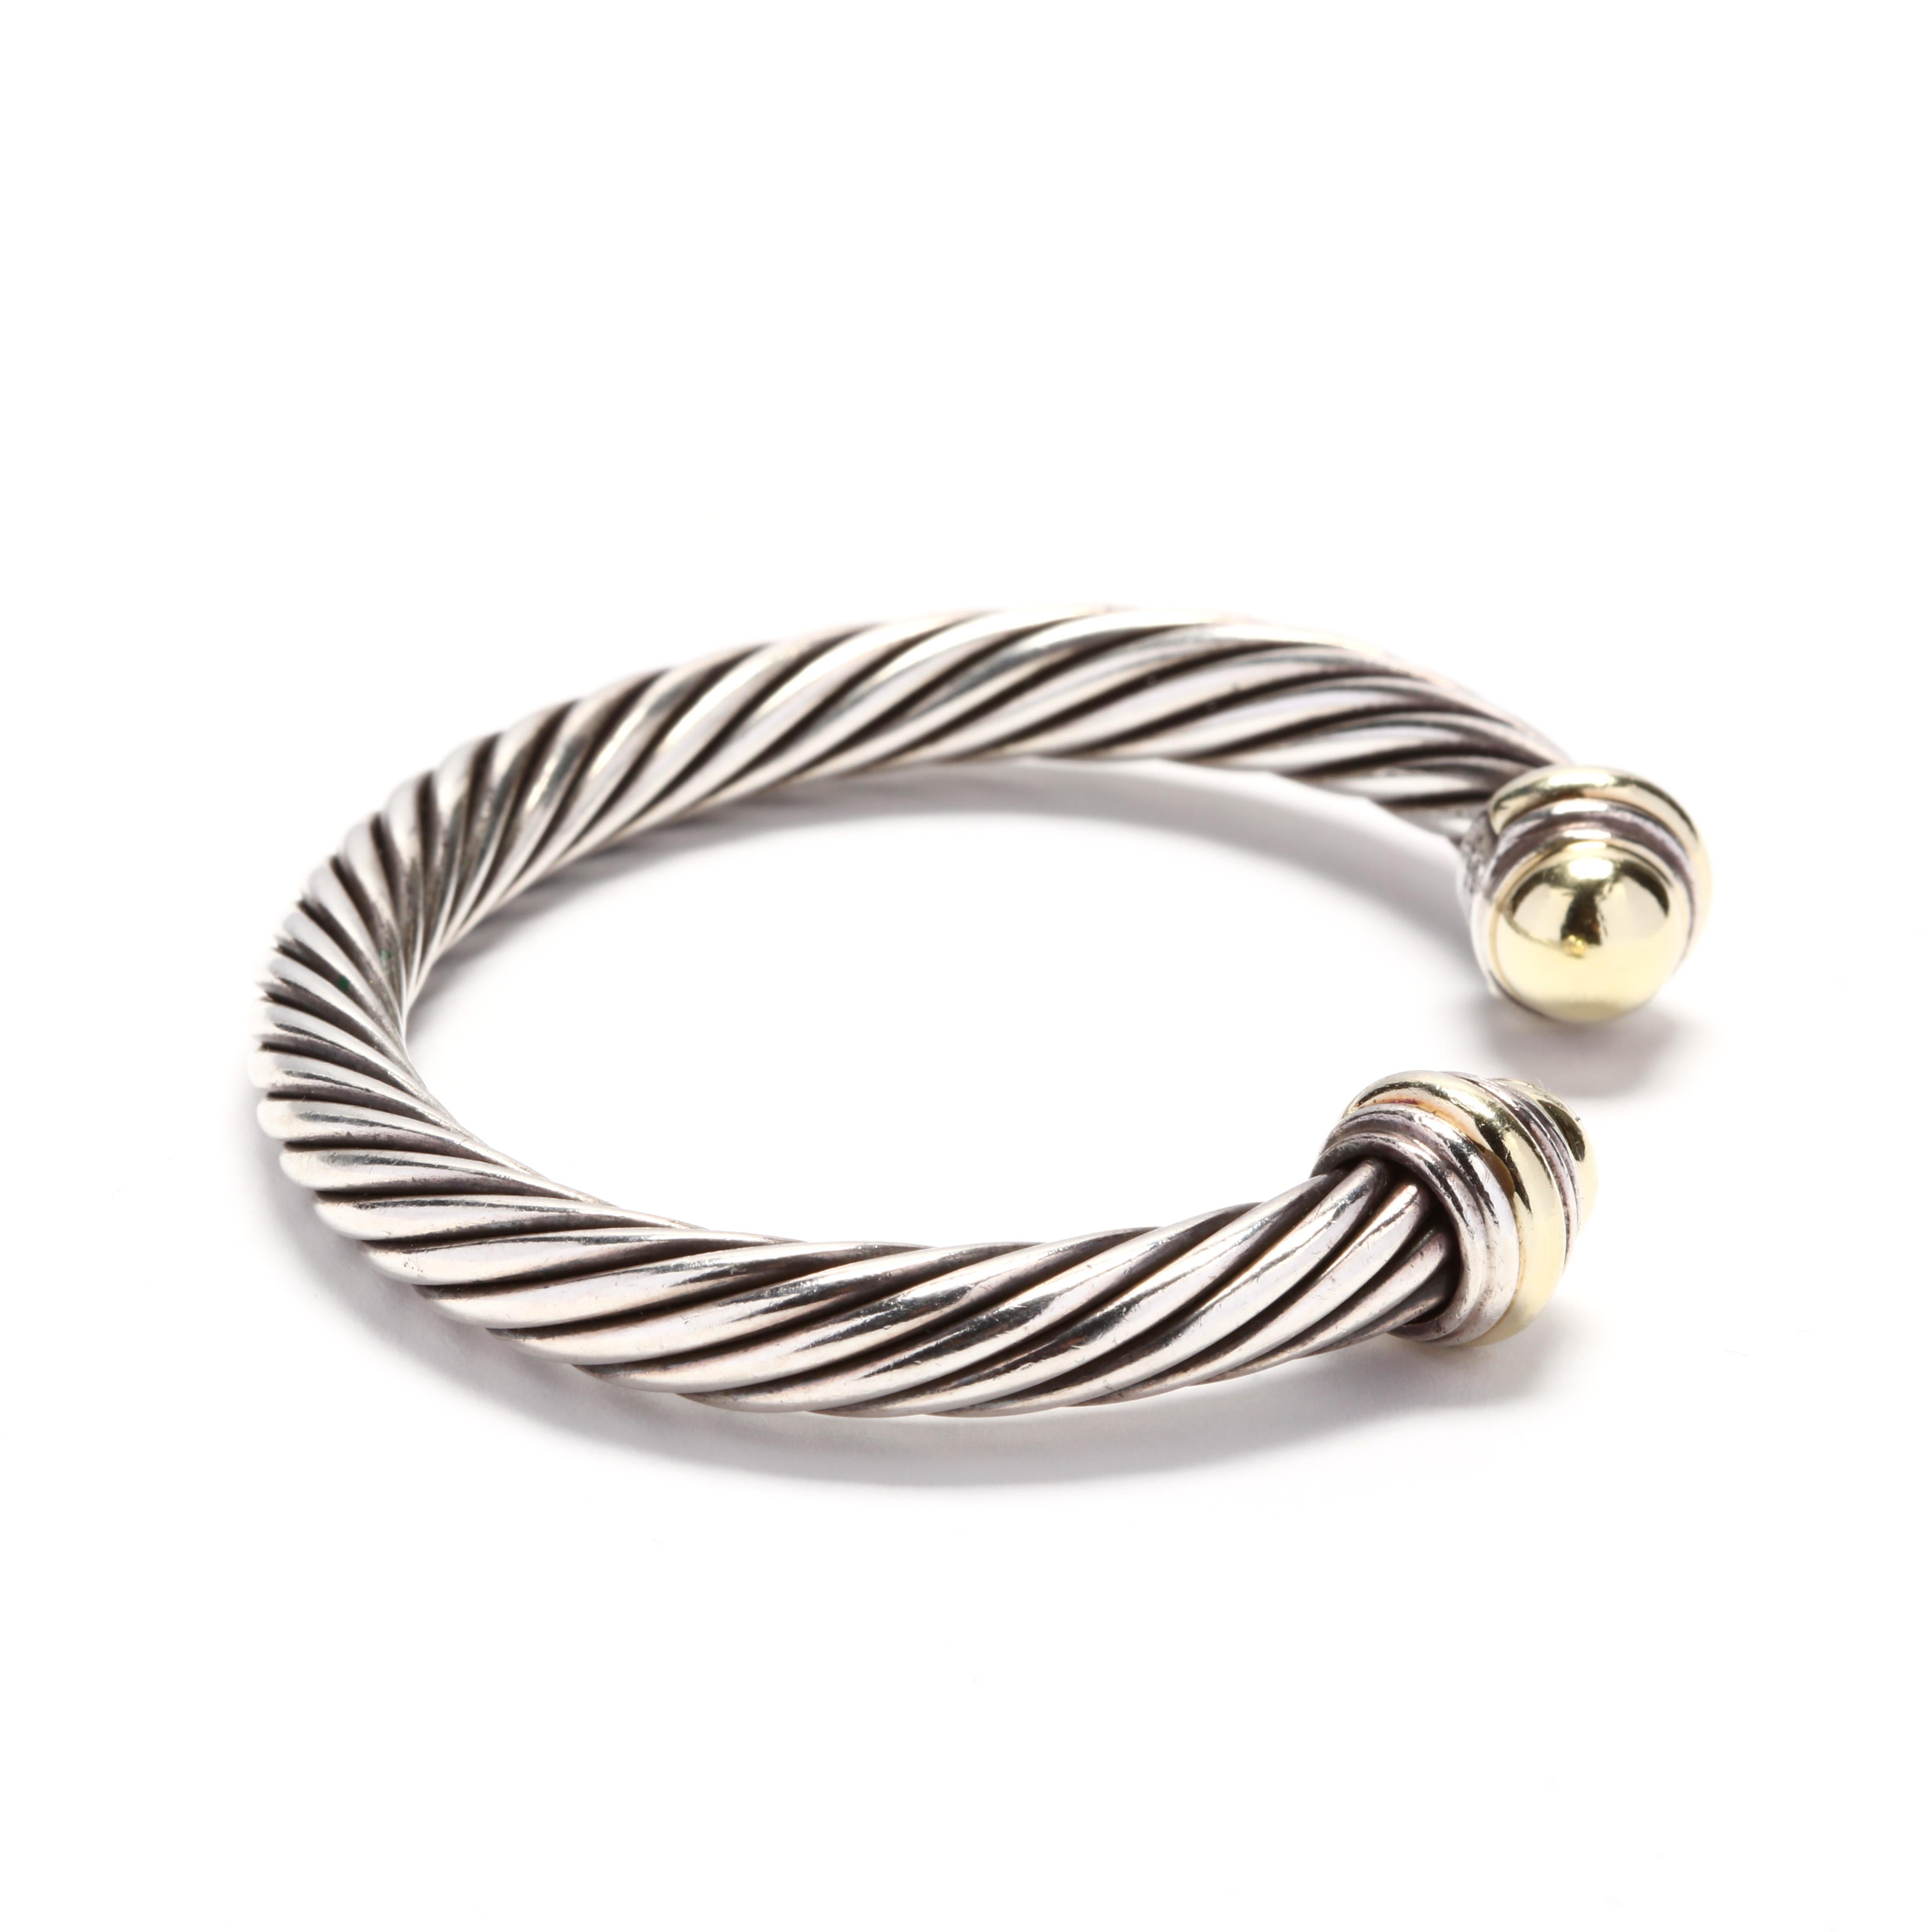 A David Yurman 14 karat yellow gold and sterling silver gold dome cuff bracelet. This 7mm cuff bracelet features a cable motif cuff with gold dome endcaps. The endcaps has a minor dent but not noticeable when worn.



Length: 6.25 in. with a 5/8 in.